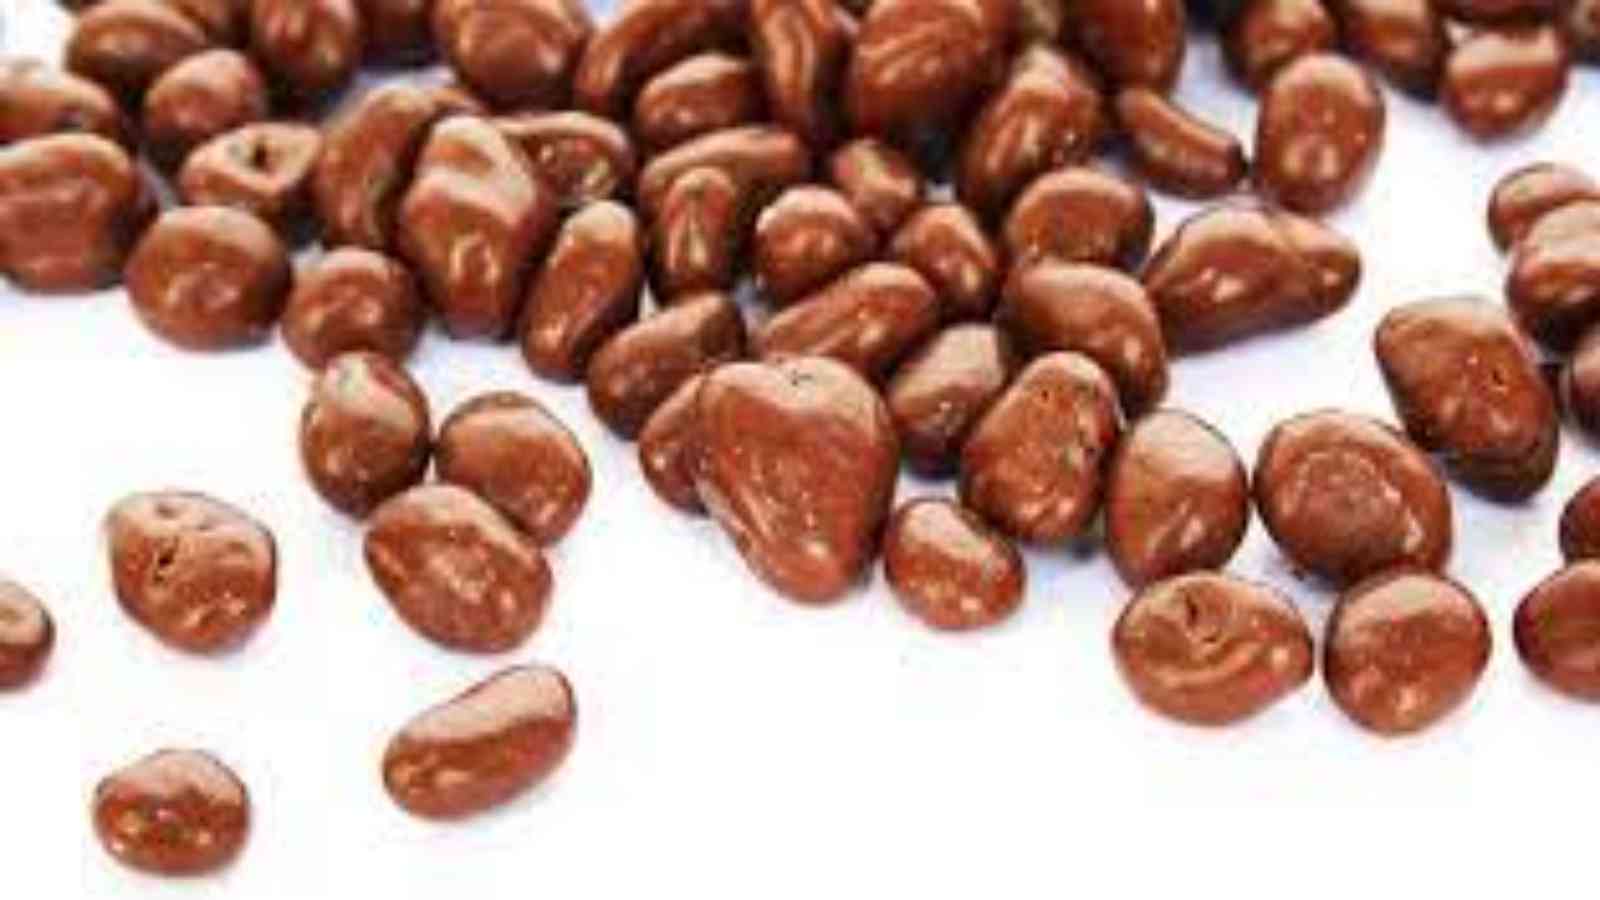 National Chocolate Covered Raisin Day 2023: Date, History, Facts